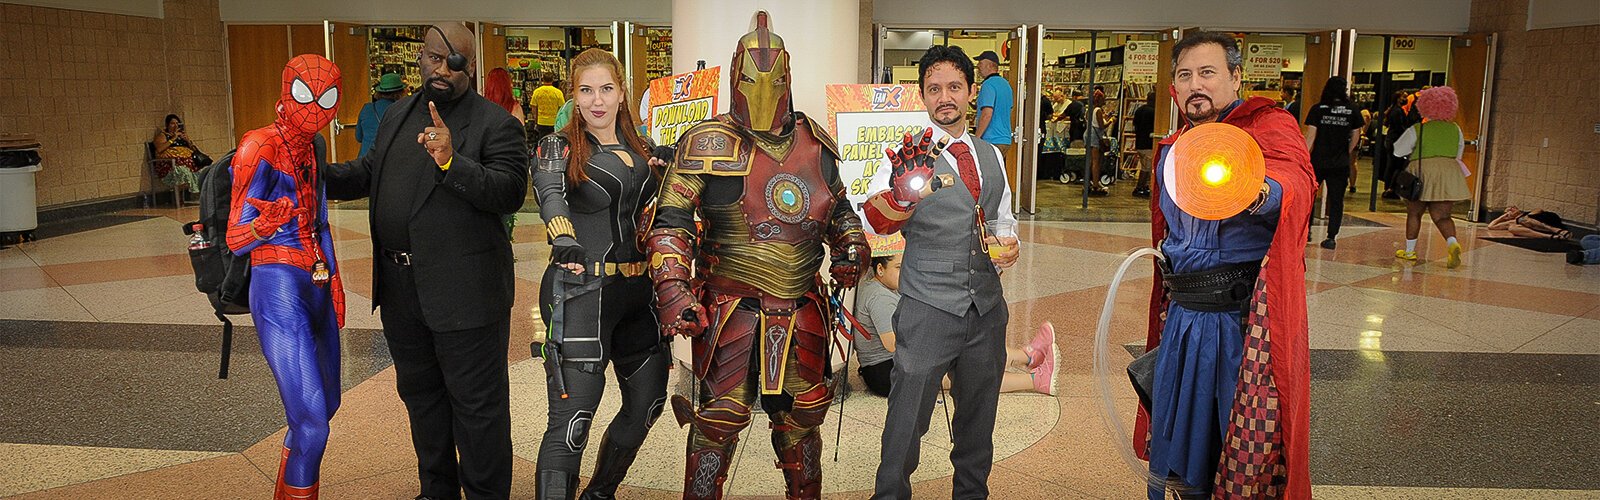 A group of attendees at the Tampa Bay Comic Con pose outside the exhibit hall at the Tampa Convention Center for a photo.